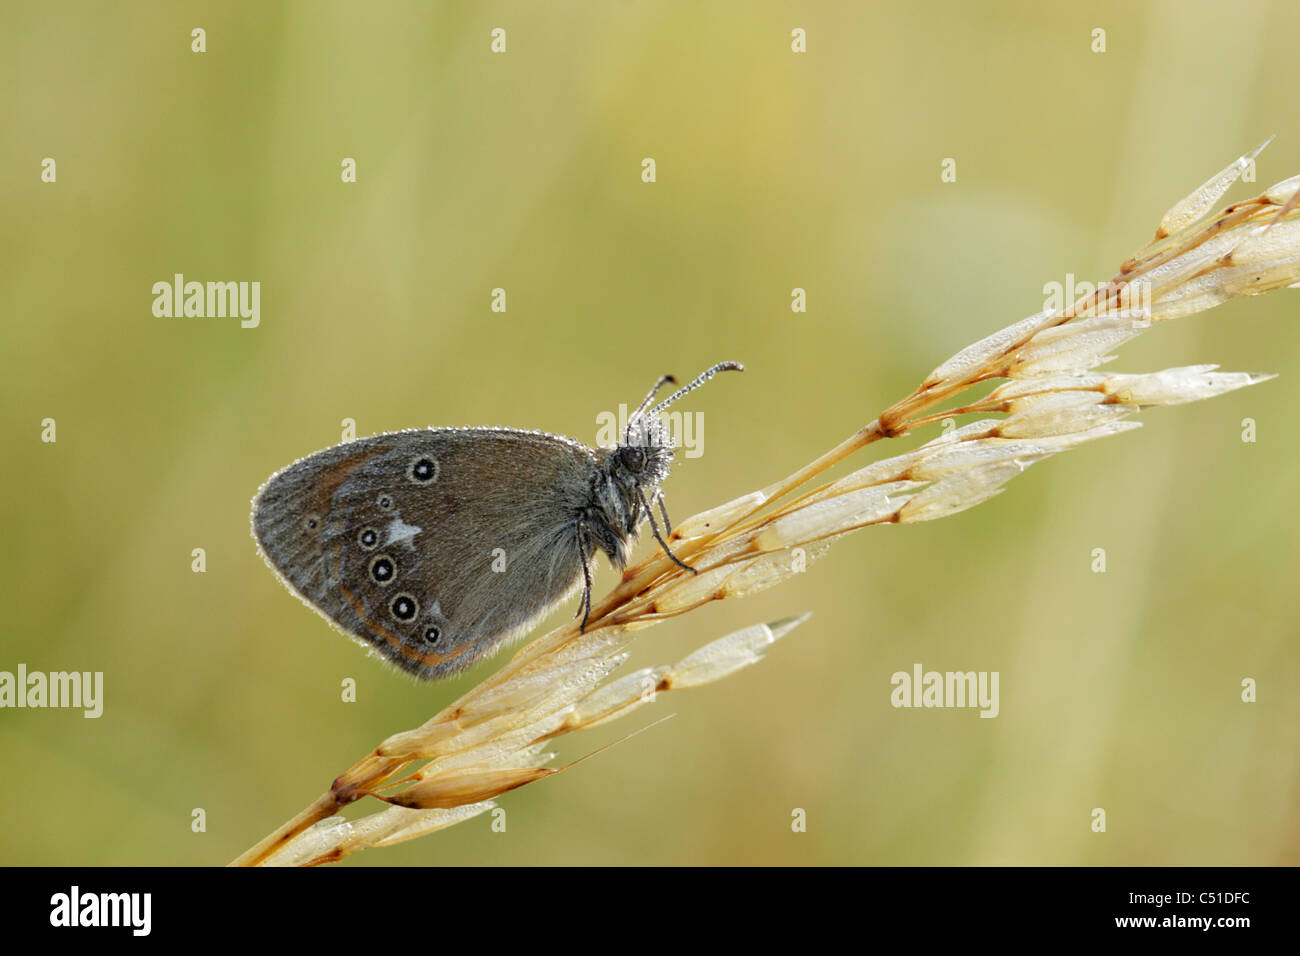 Chestnut heath butterfly (Coenonympha glycerion) covered with dew while perched on a grass stem Stock Photo